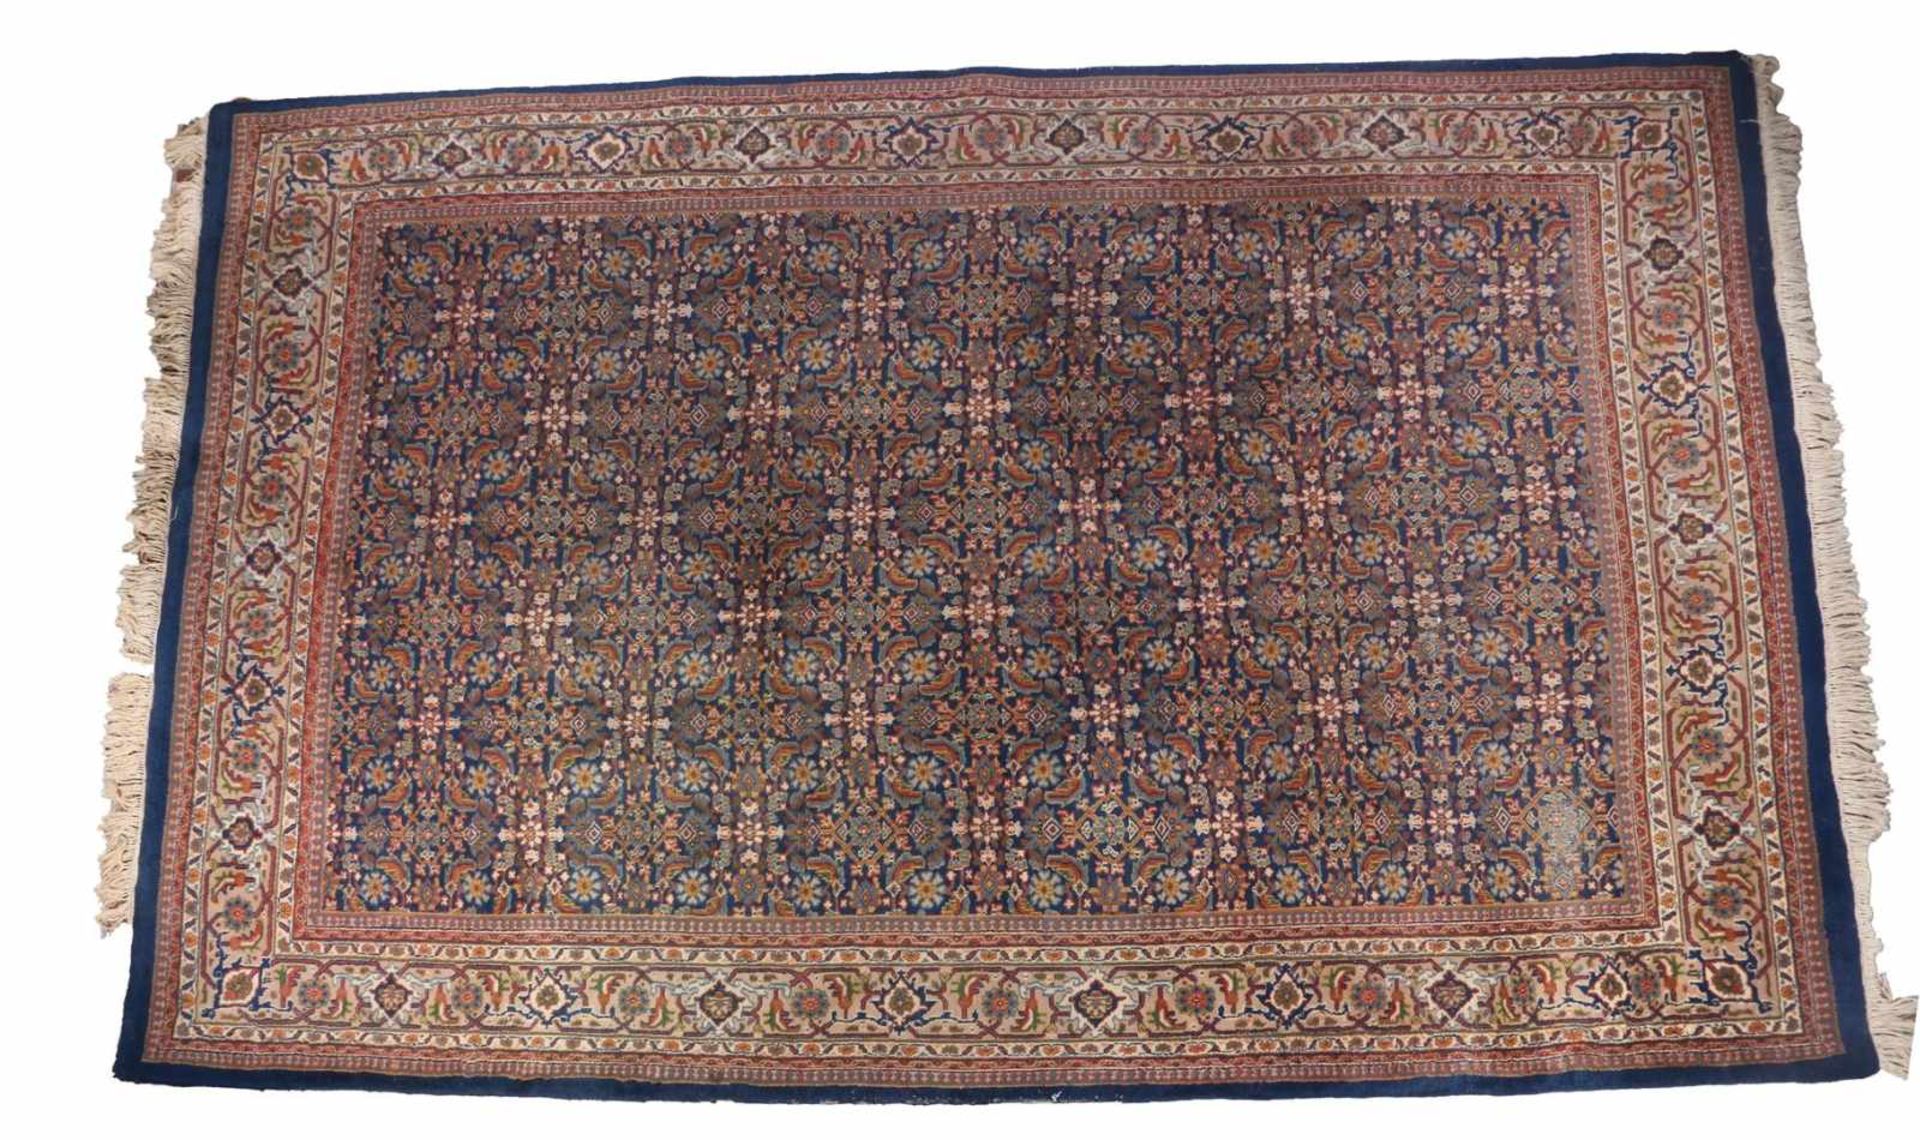 Oriental hand-knotted wool rug, 316x223 cm